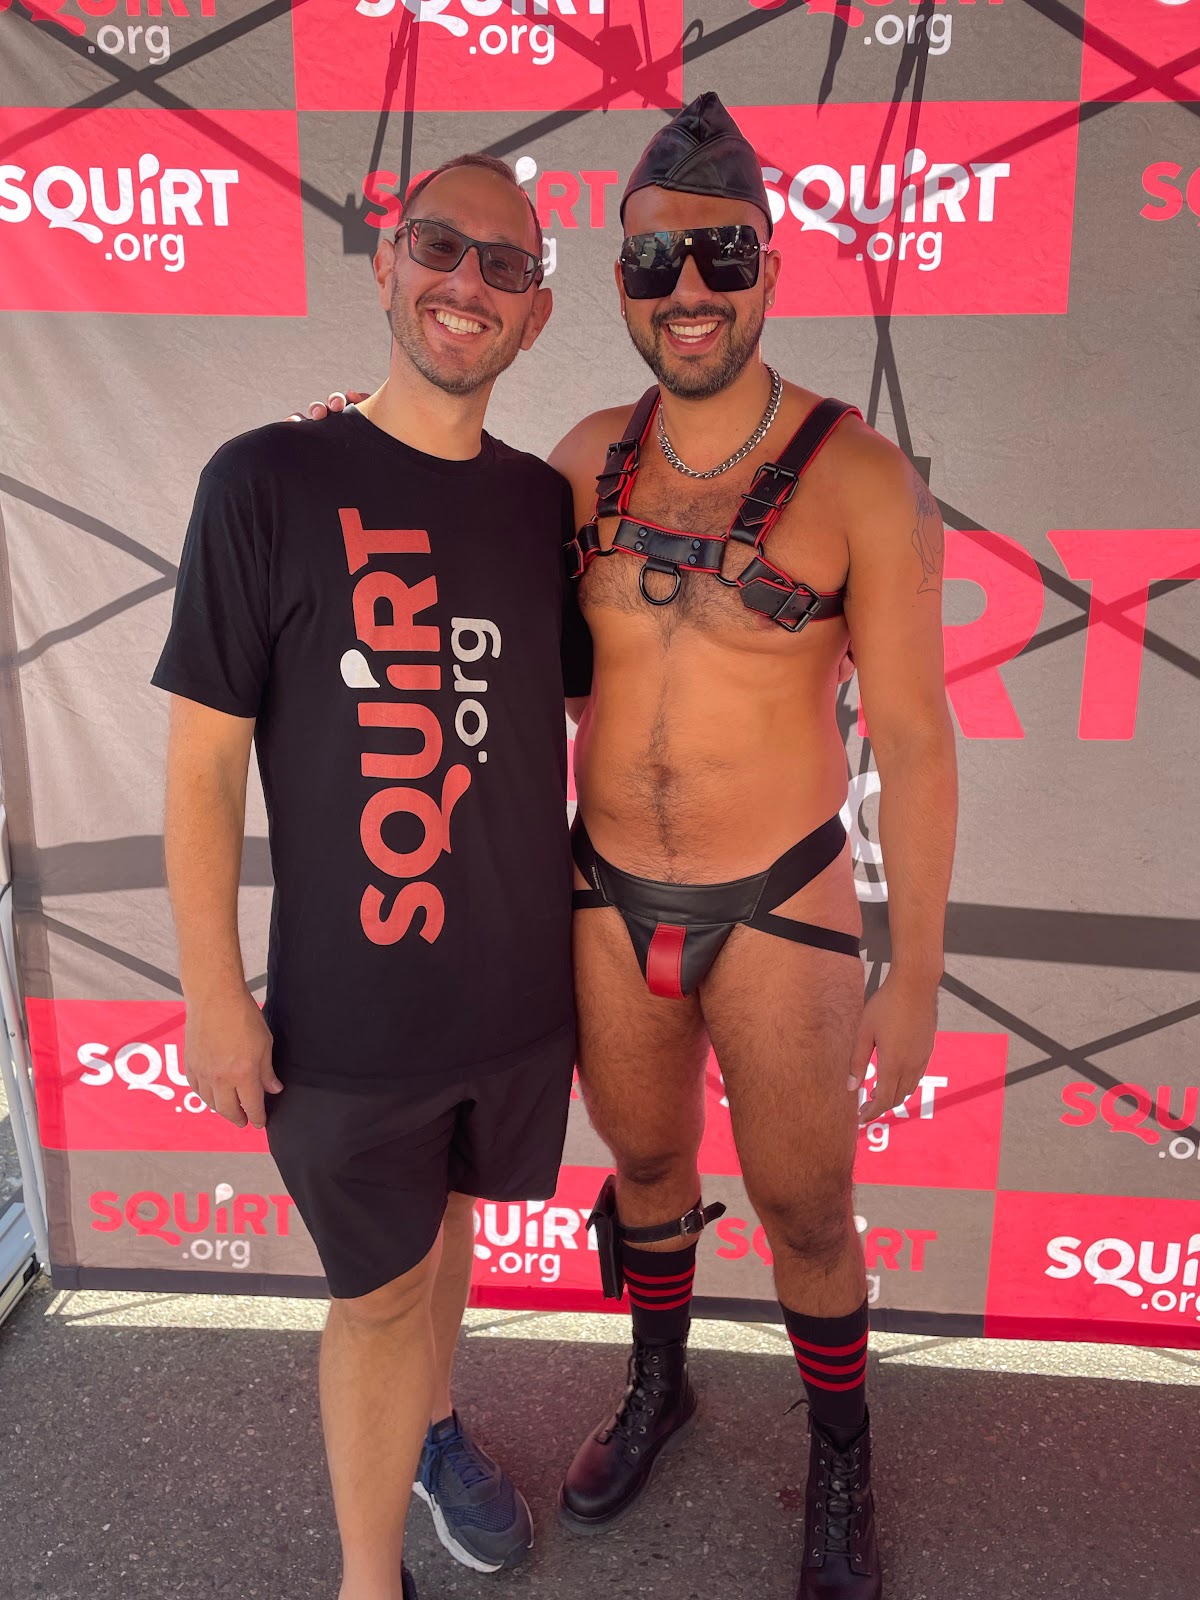 gay onlyfans creator Phil DuChamp wearing a black leather jockstrap and harness posing with a friend wearing a black Squirt.org t-shirt